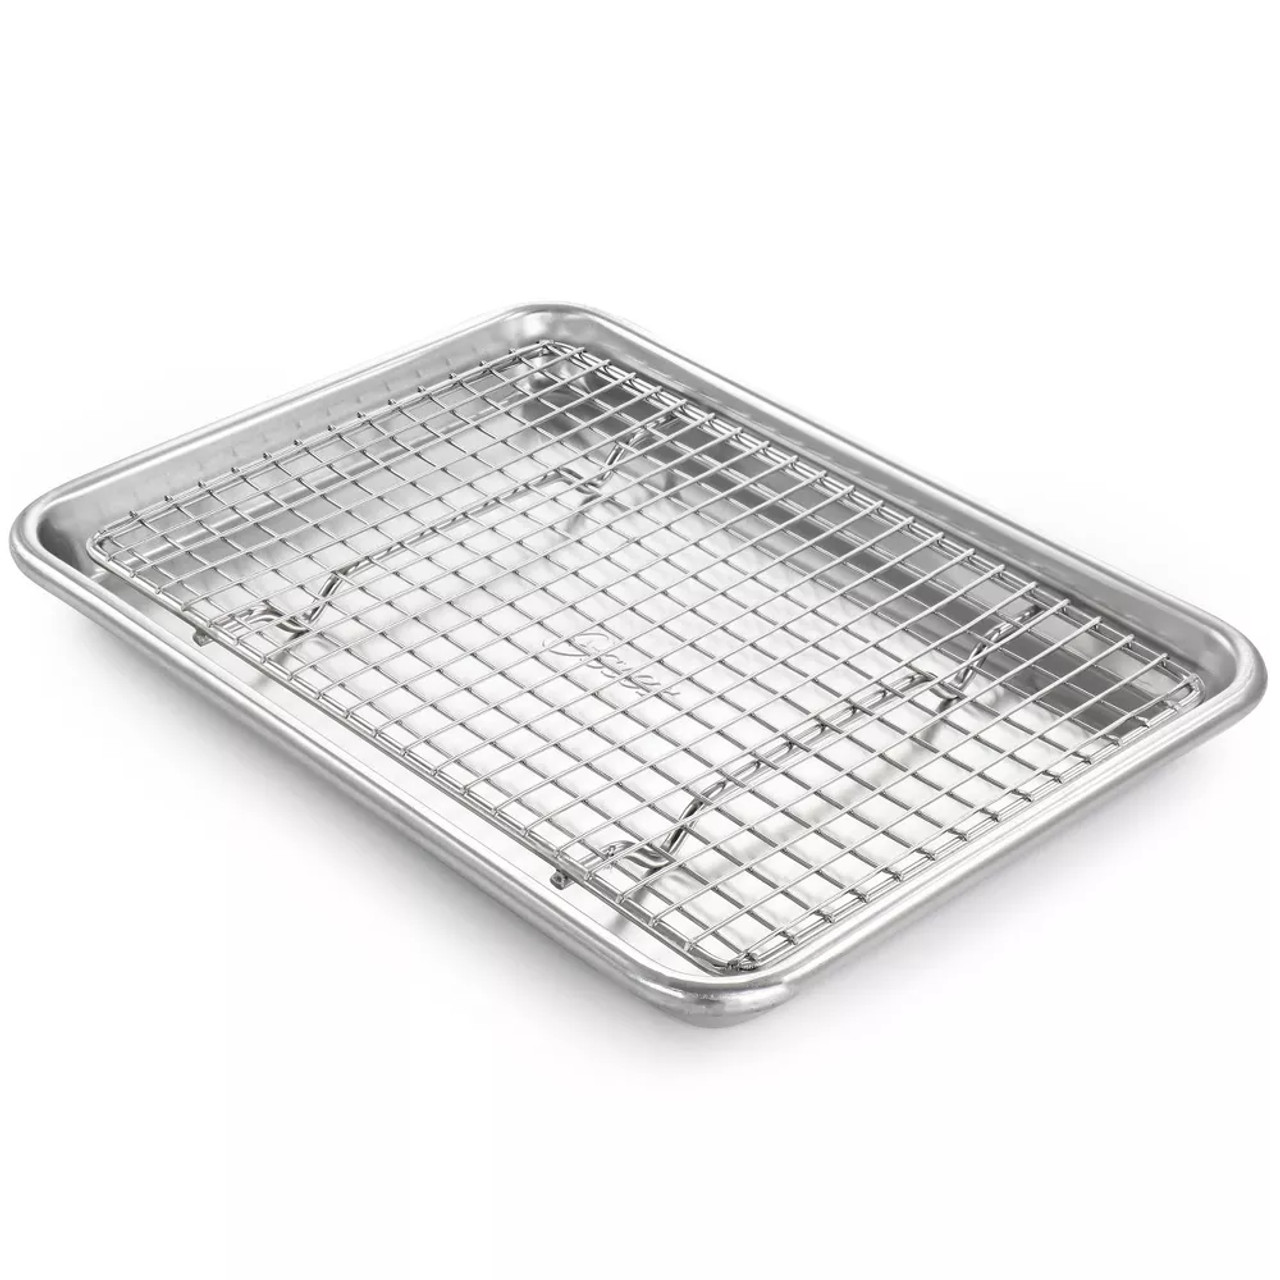 https://cdn11.bigcommerce.com/s-bjqt1yp5q3/images/stencil/1280x1280/products/7967/29427/Oster_13_in_Baking_Sheet_with_Cooling_Rack_5__11529.1690141165.jpg?c=1